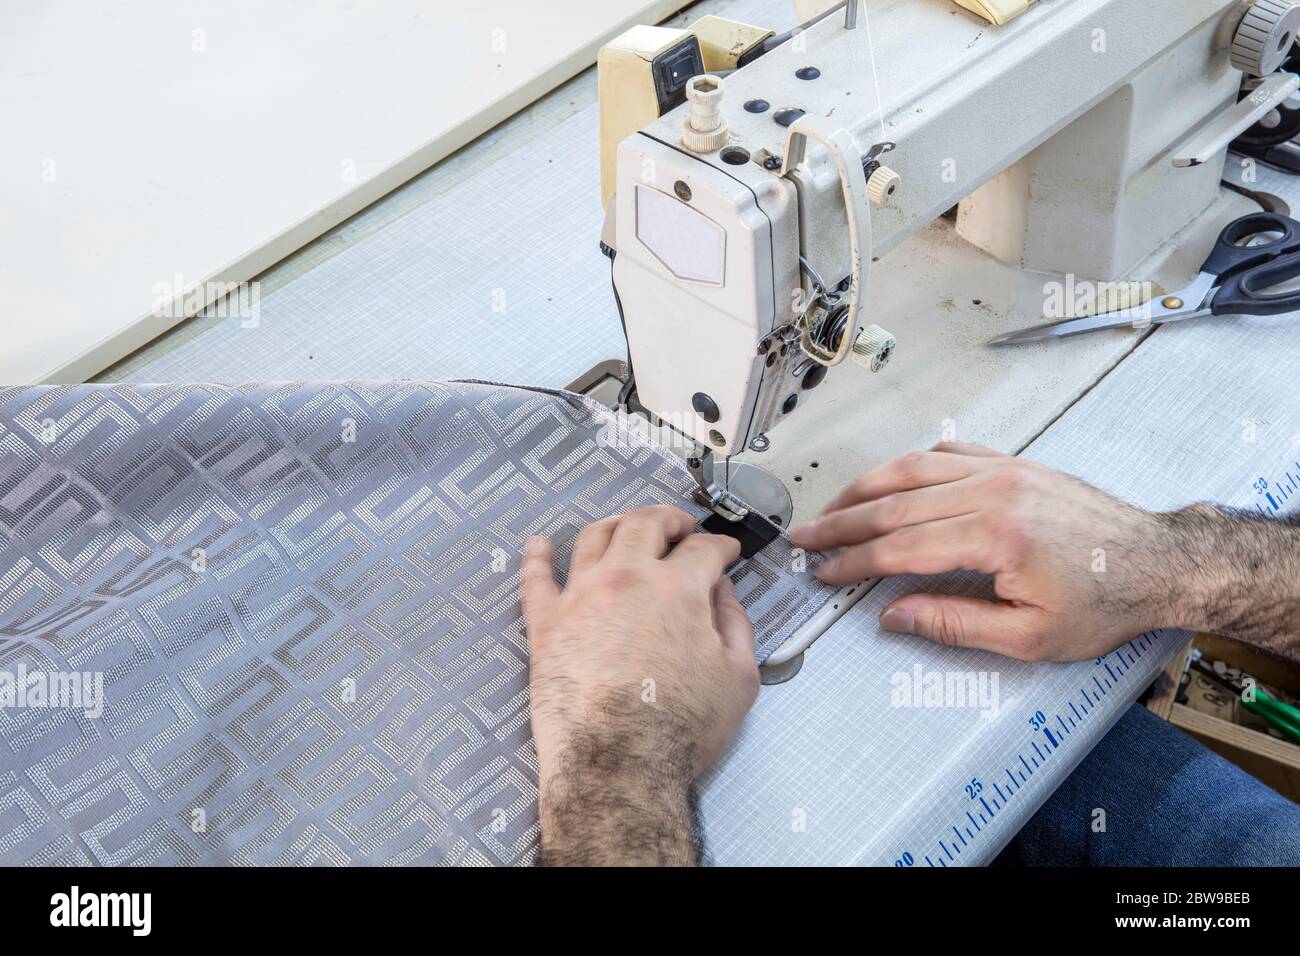 Tailor stitched seat fabrics. Close-up on man working with her sewing machine stitching a long length of fabric. Stock Photo